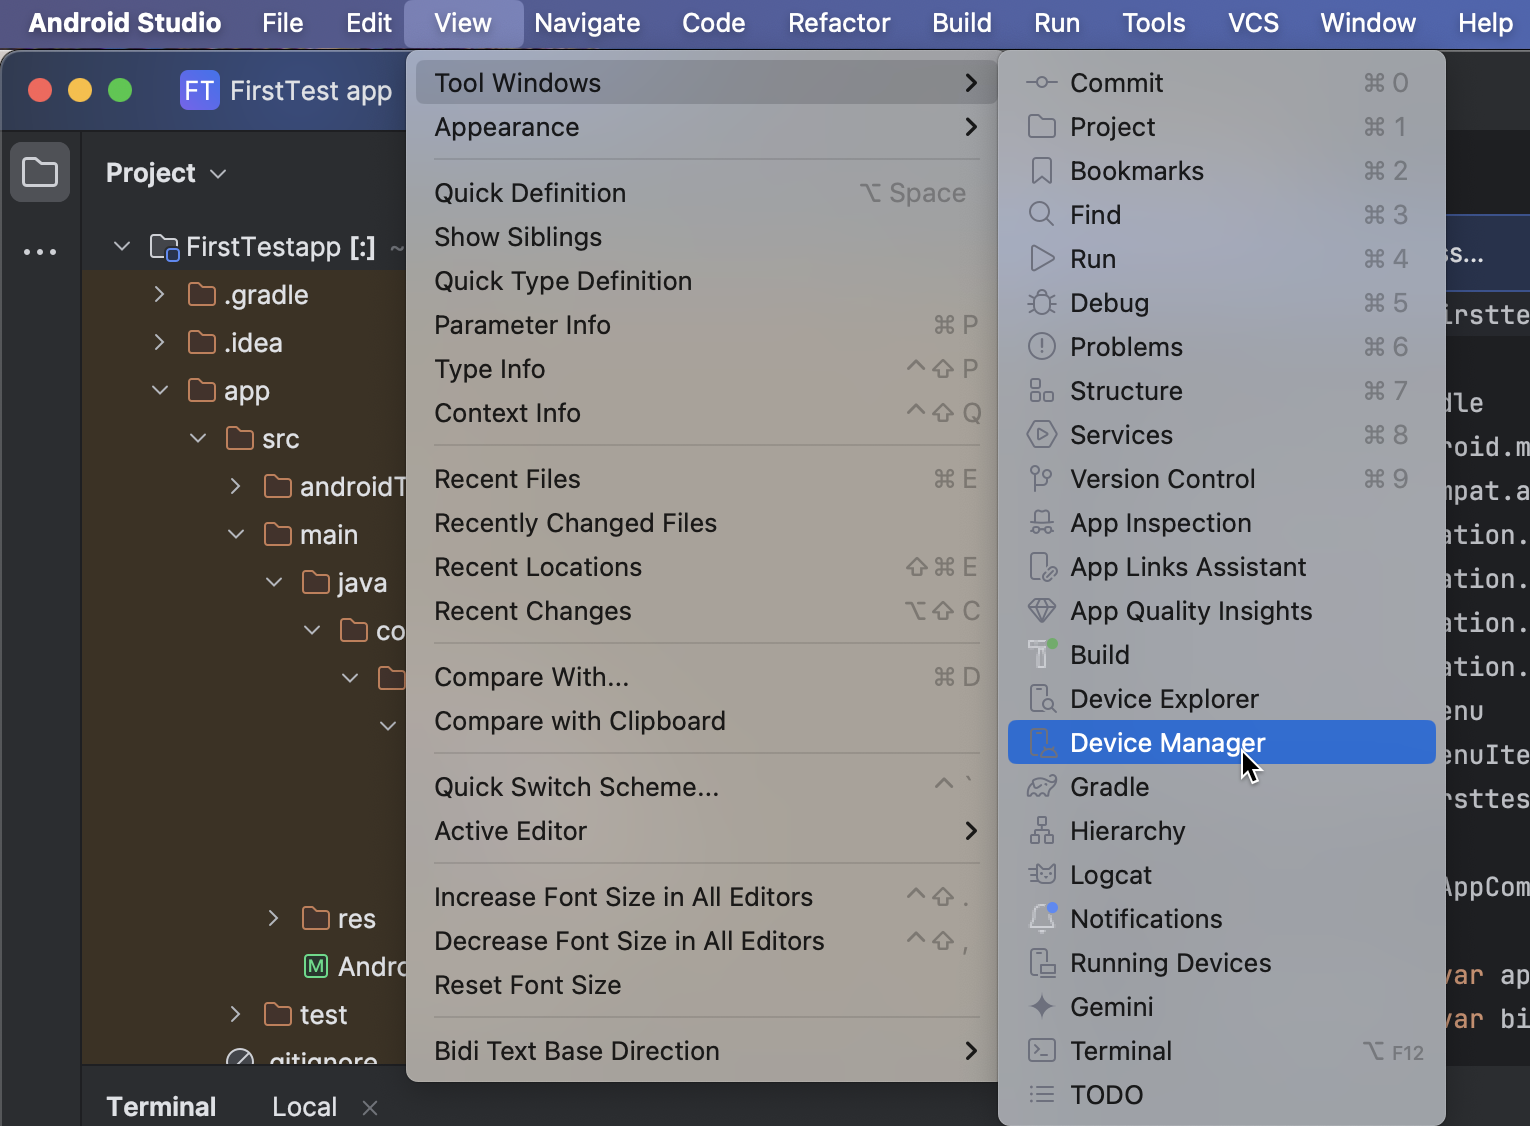 Android Studio: Main menu > View > Tools window > click Device Manager